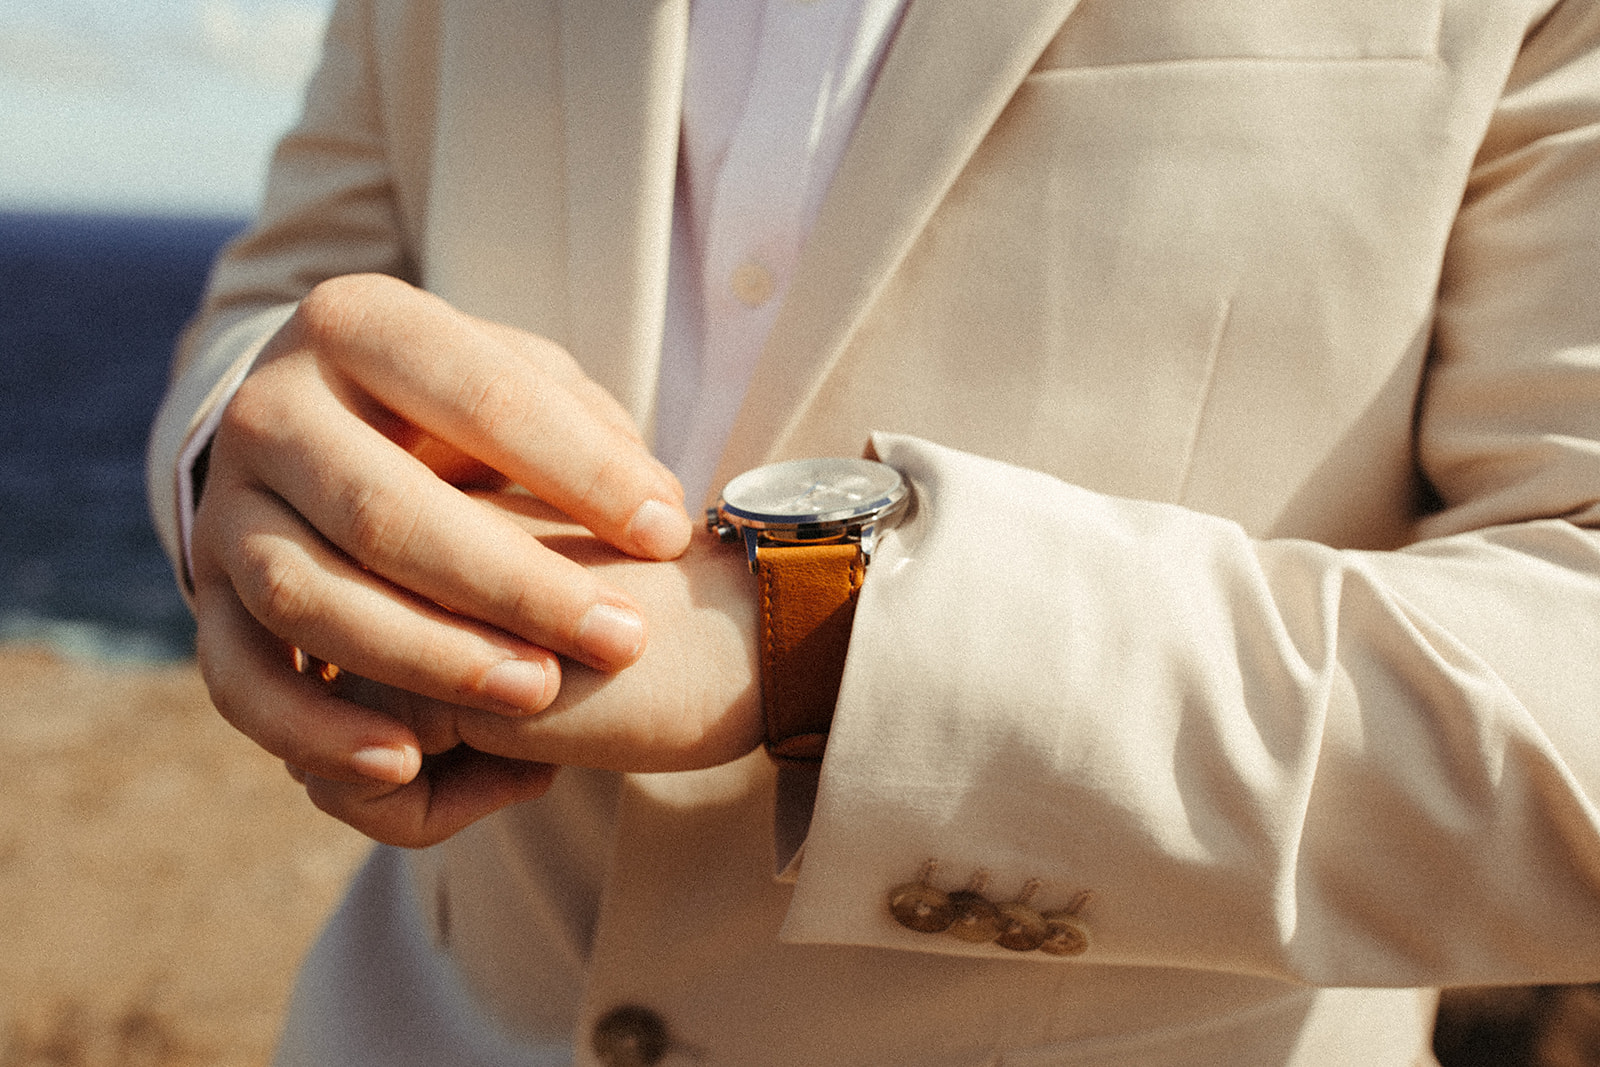 groom style, showing off cream colored suit and watch